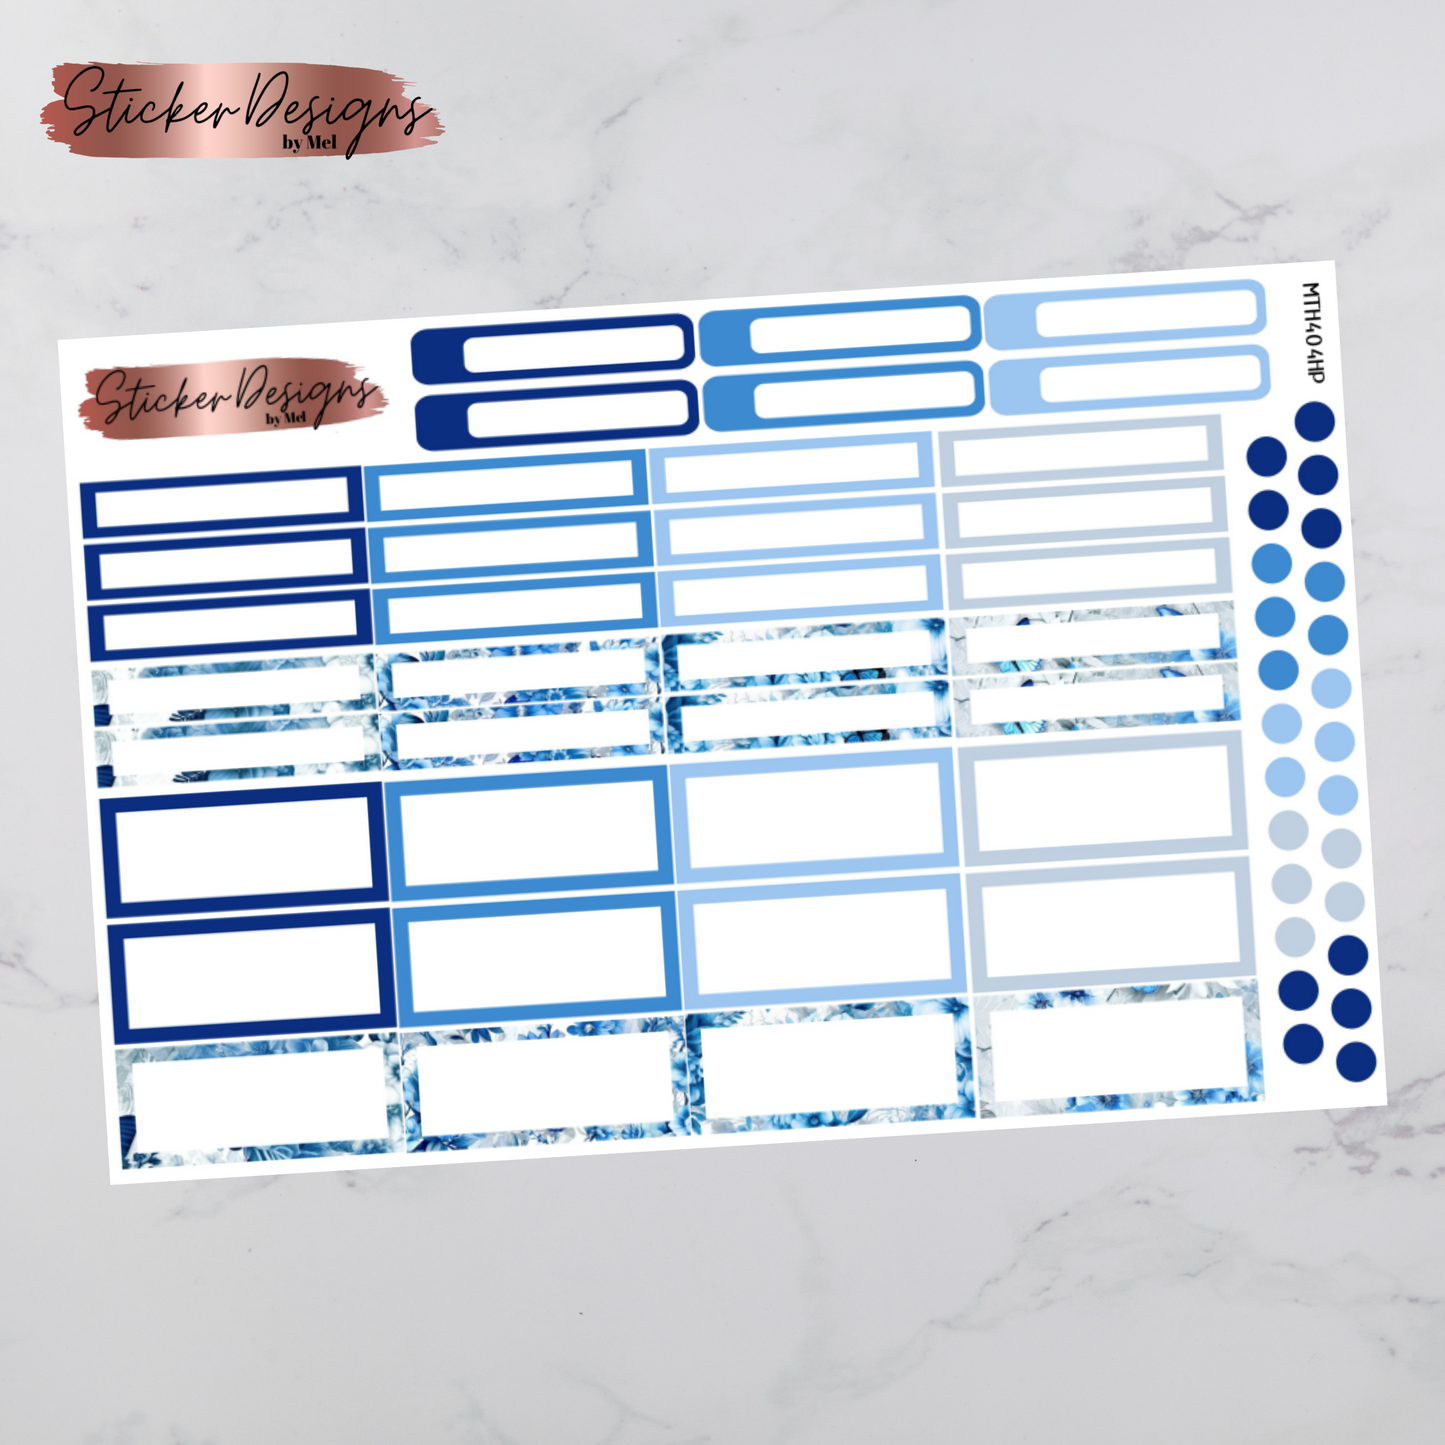 MTH 404 - Classic Happy Planner Monthly